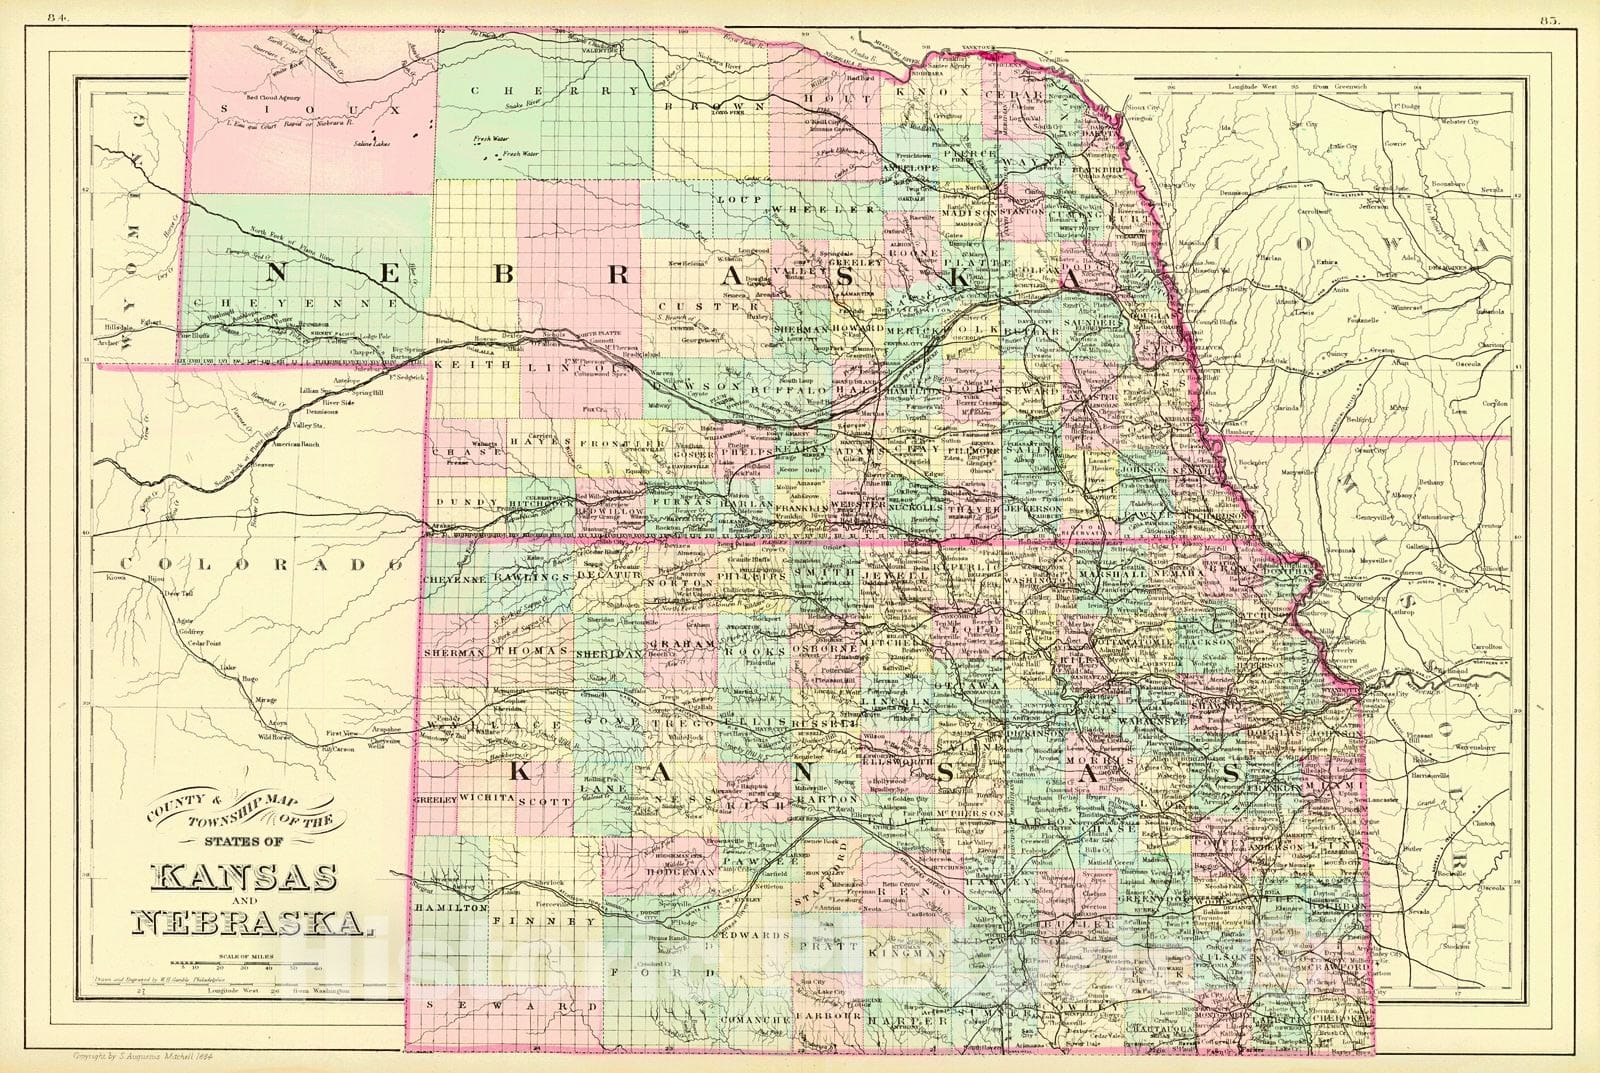 Historic Map : 1884 County & Township Map of the States of Kansas and Nebraska : Vintage Wall Art